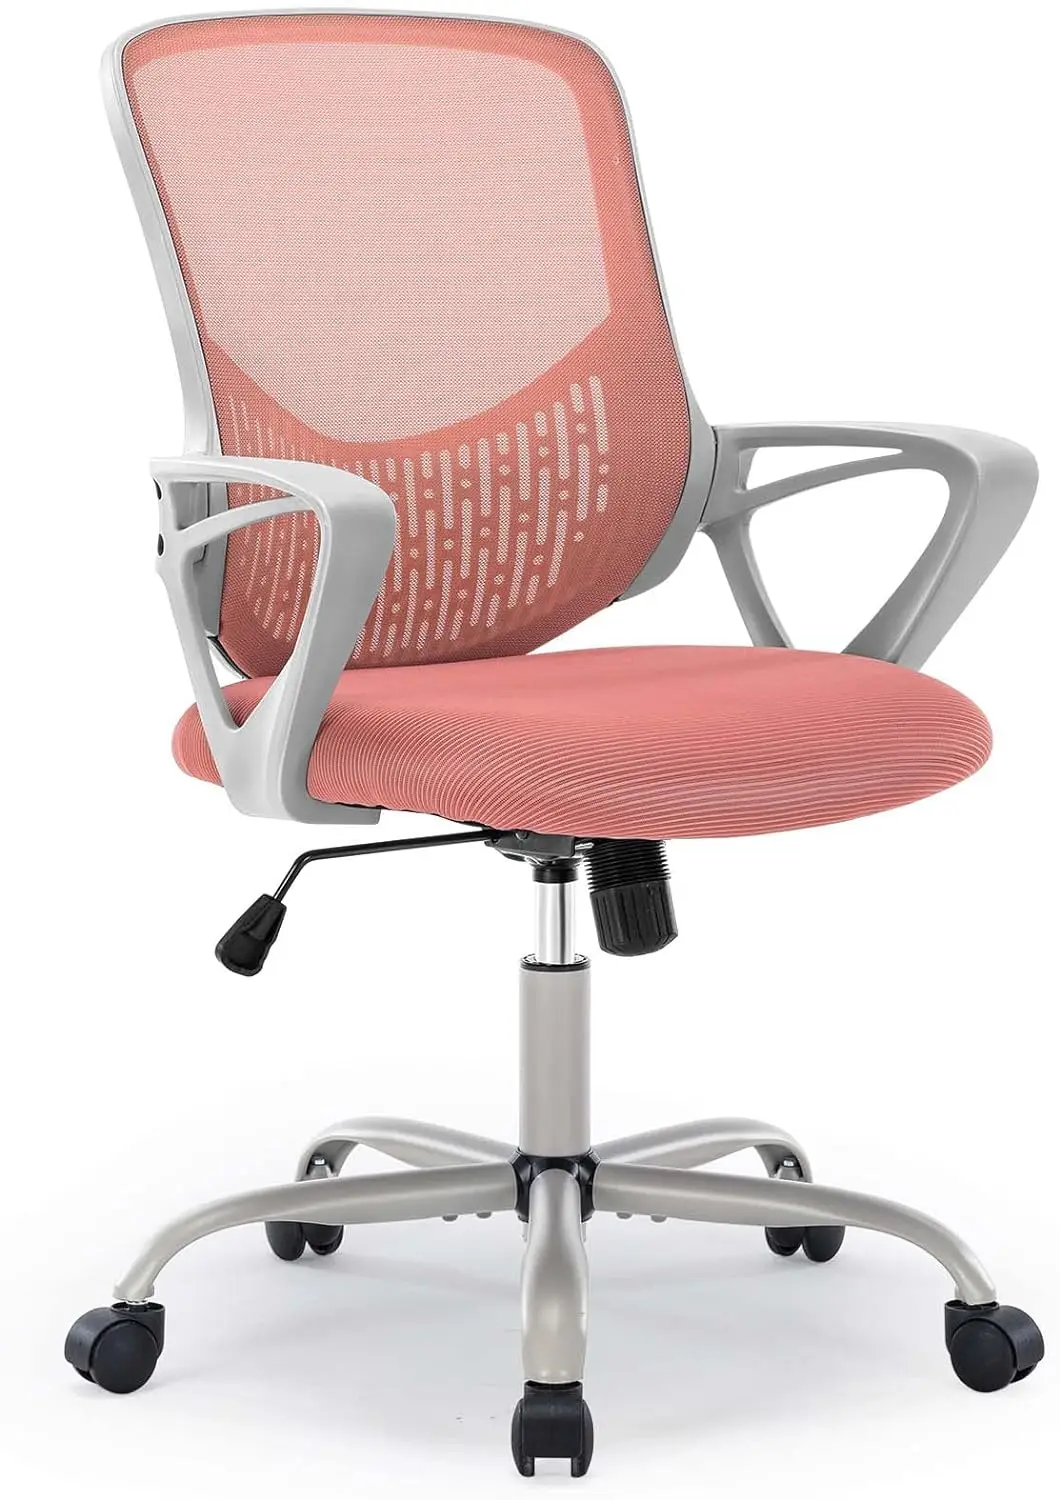 home office chair ergonomic desk chair mesh computer chair with lumbar support armrest executive rolling swivel adjustable mid Office Home Desk Mesh Fixed Armrest, Executive Computer Chair with Soft Foam Seat Cushion and Lumbar Support